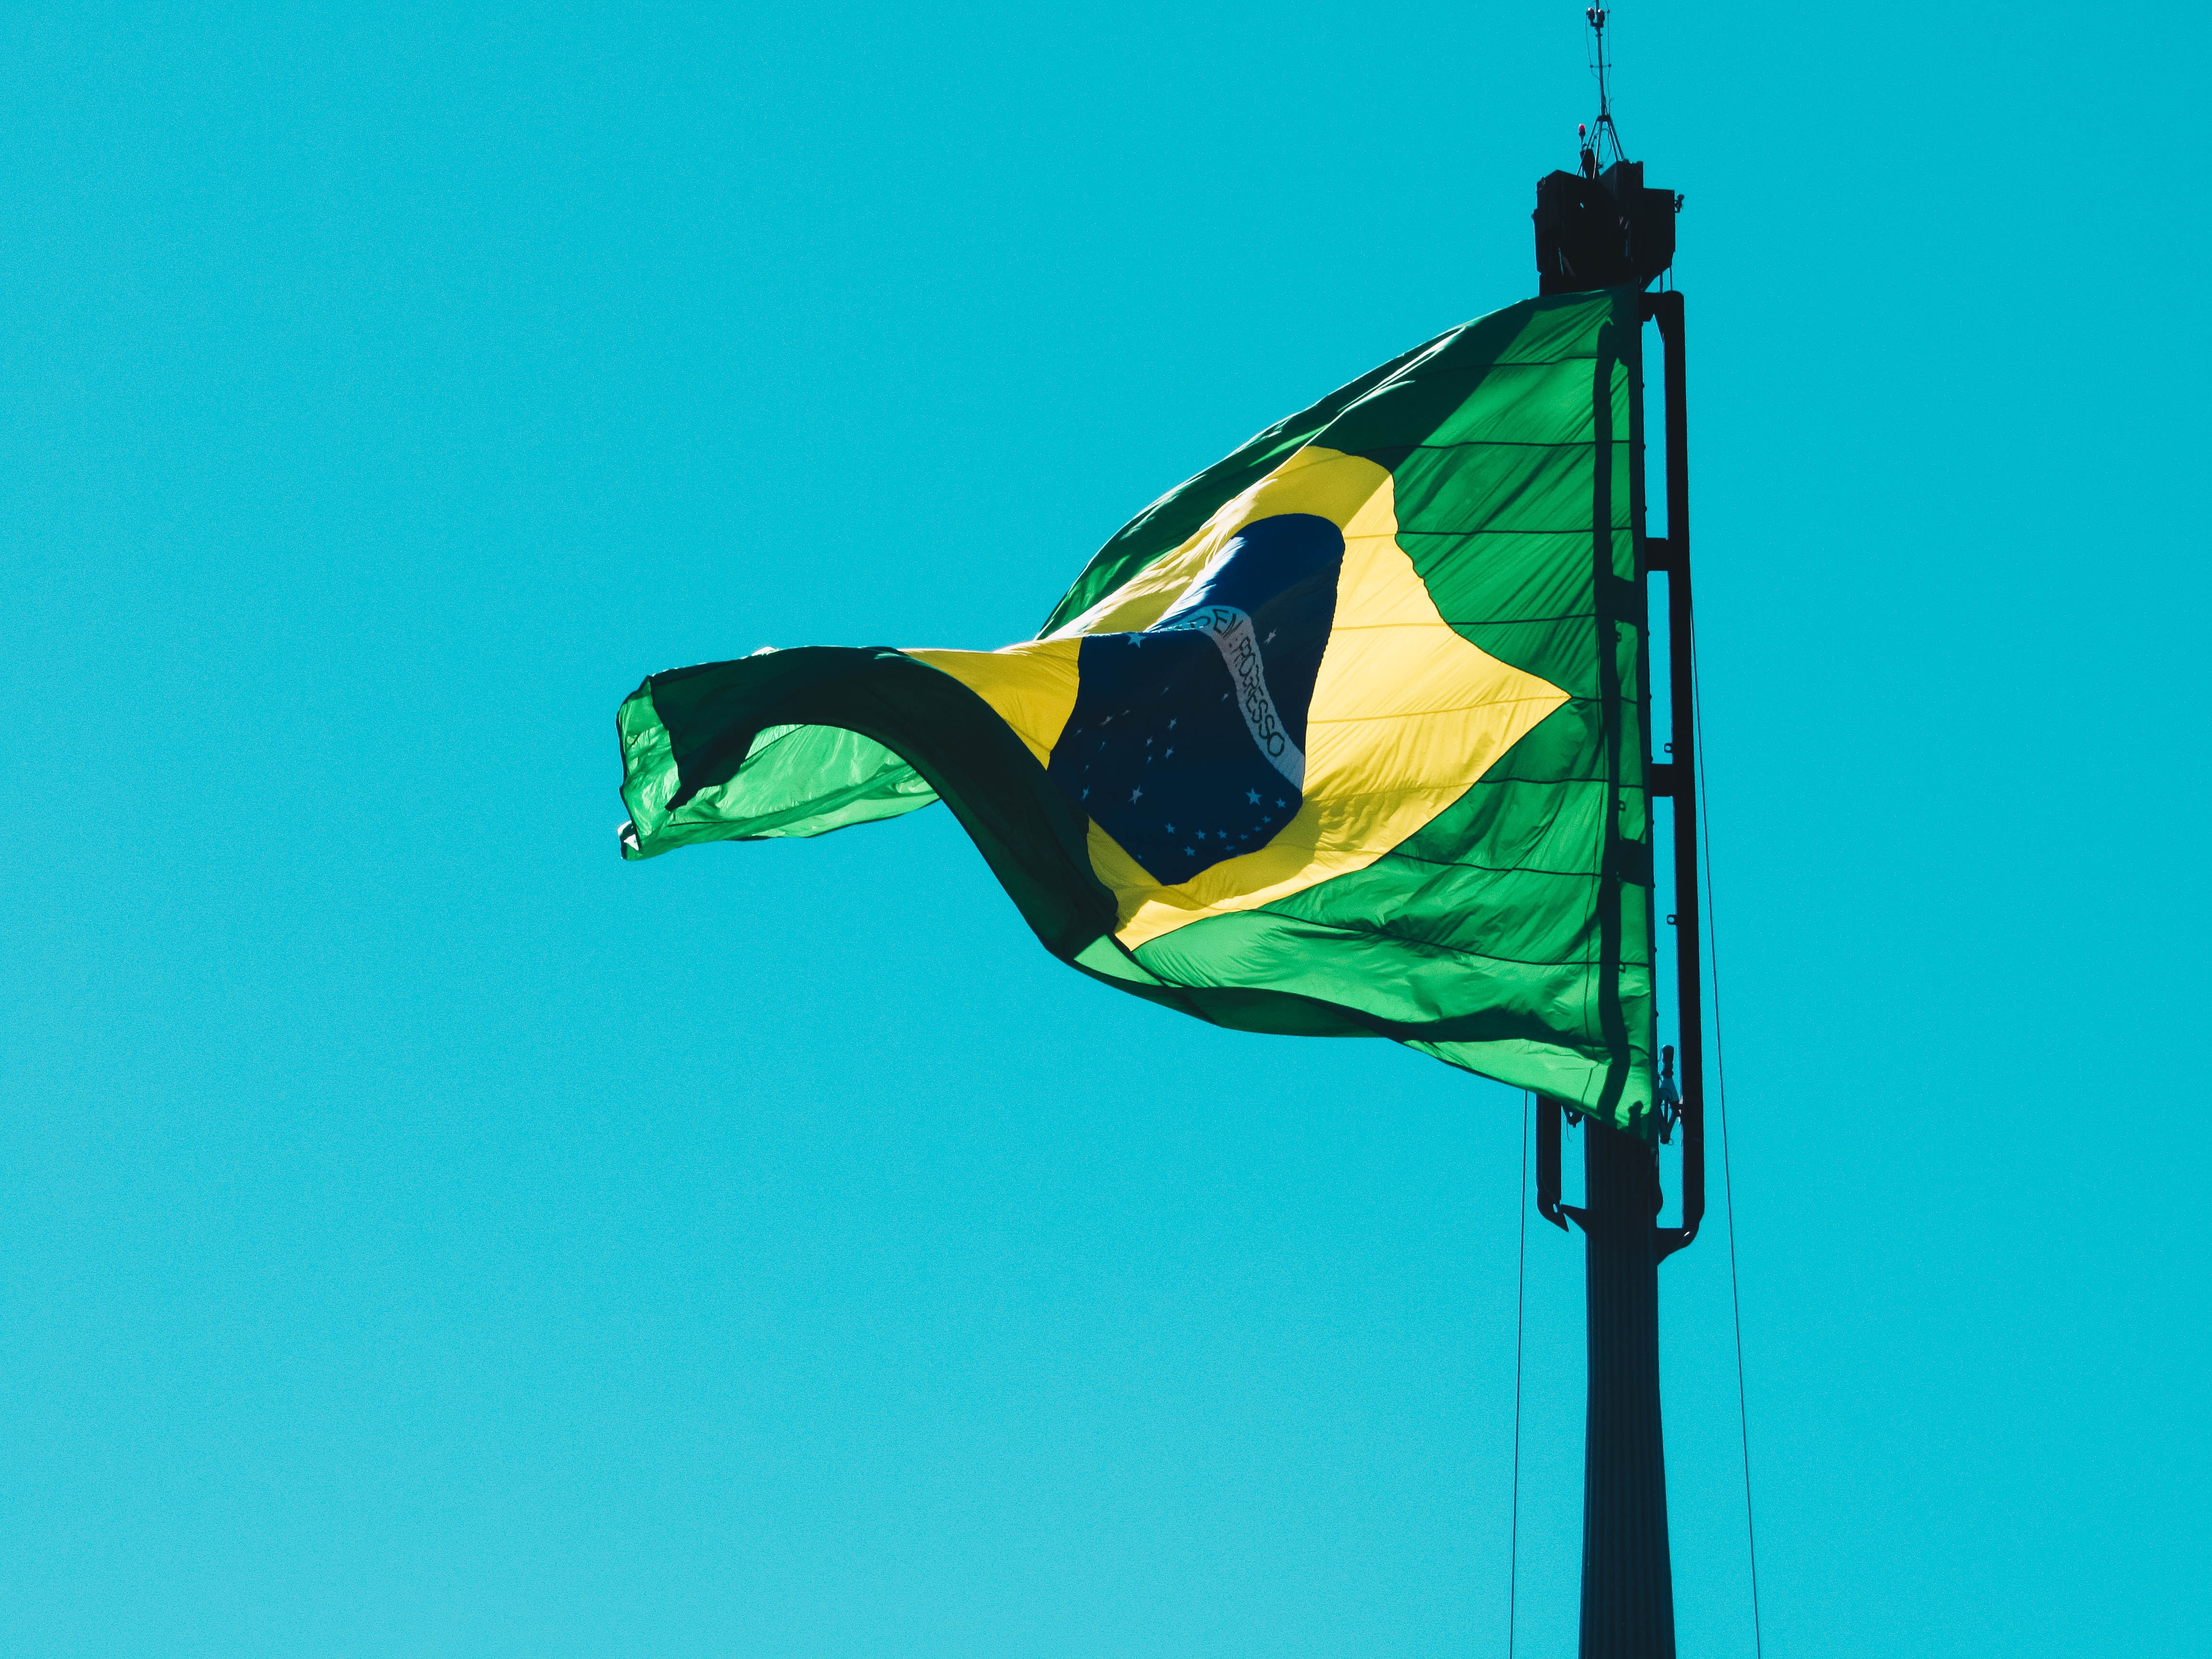 brazil flag blowing in the wind - green, yellow and black